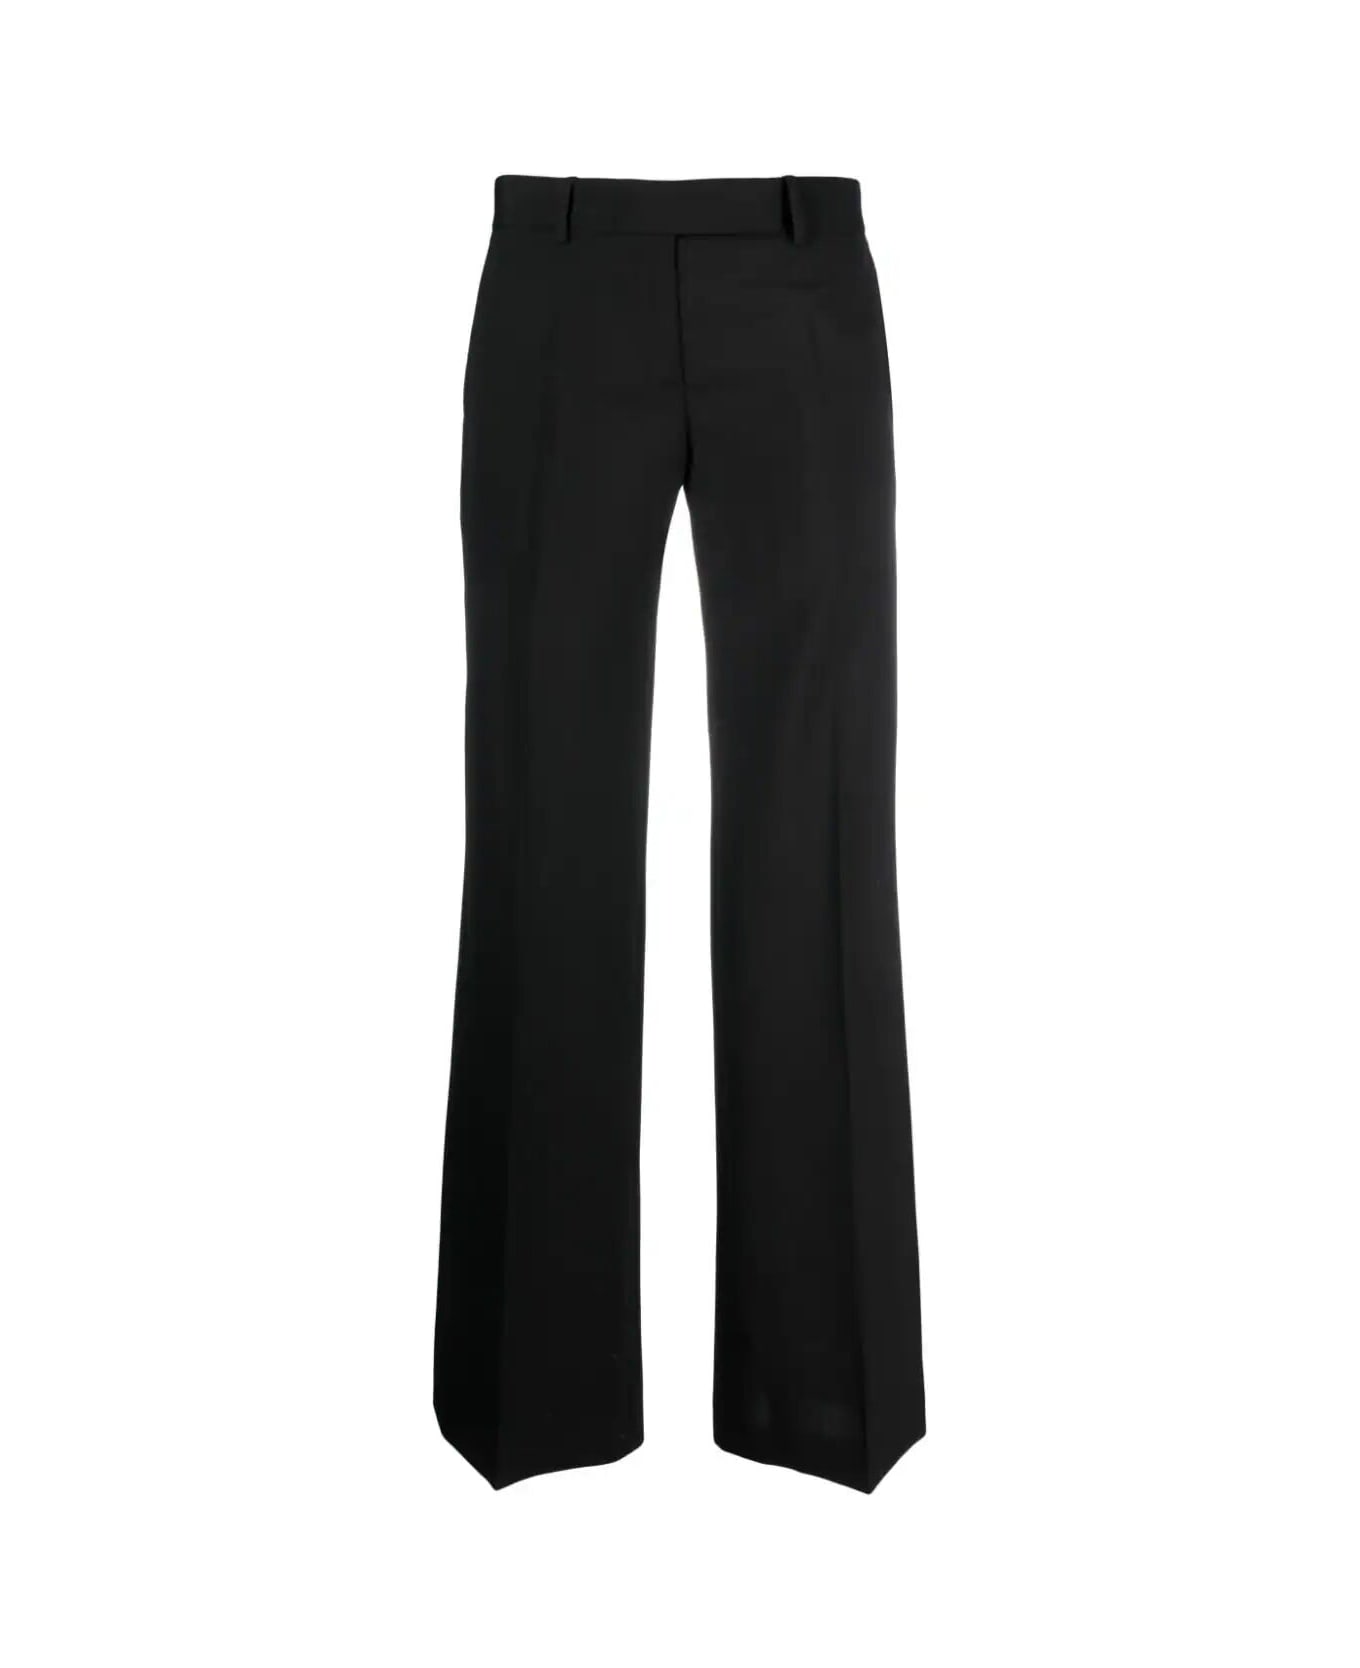 Quira Low Waist Trousers - Black